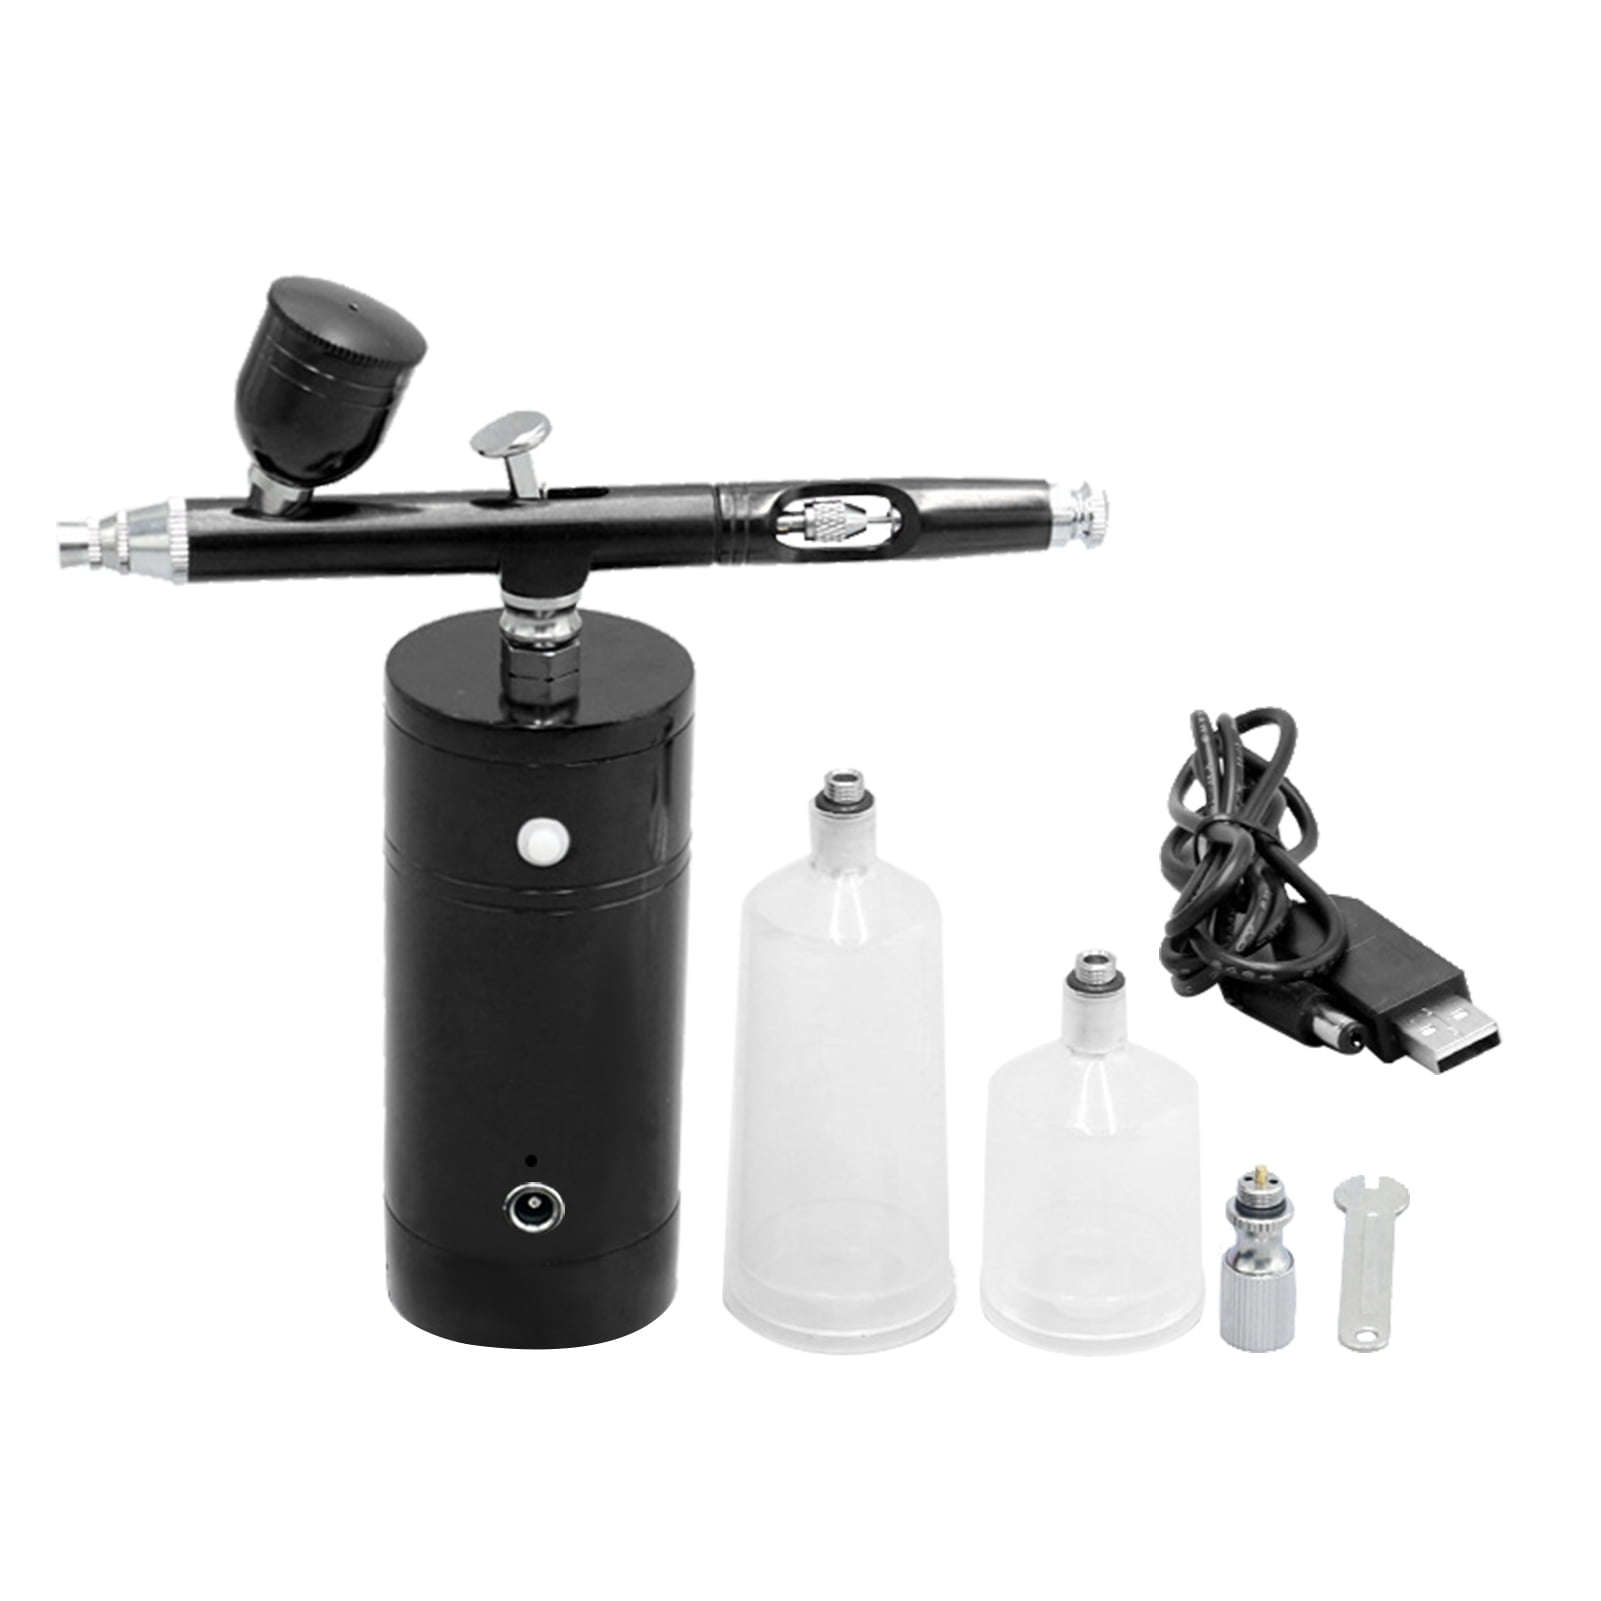 Airbrush Kit for Nail Art Rechargeable Cordless Airbrush Compressor Air  Brush for Barber, Cake Decor, Makeup, Model Painting - AliExpress